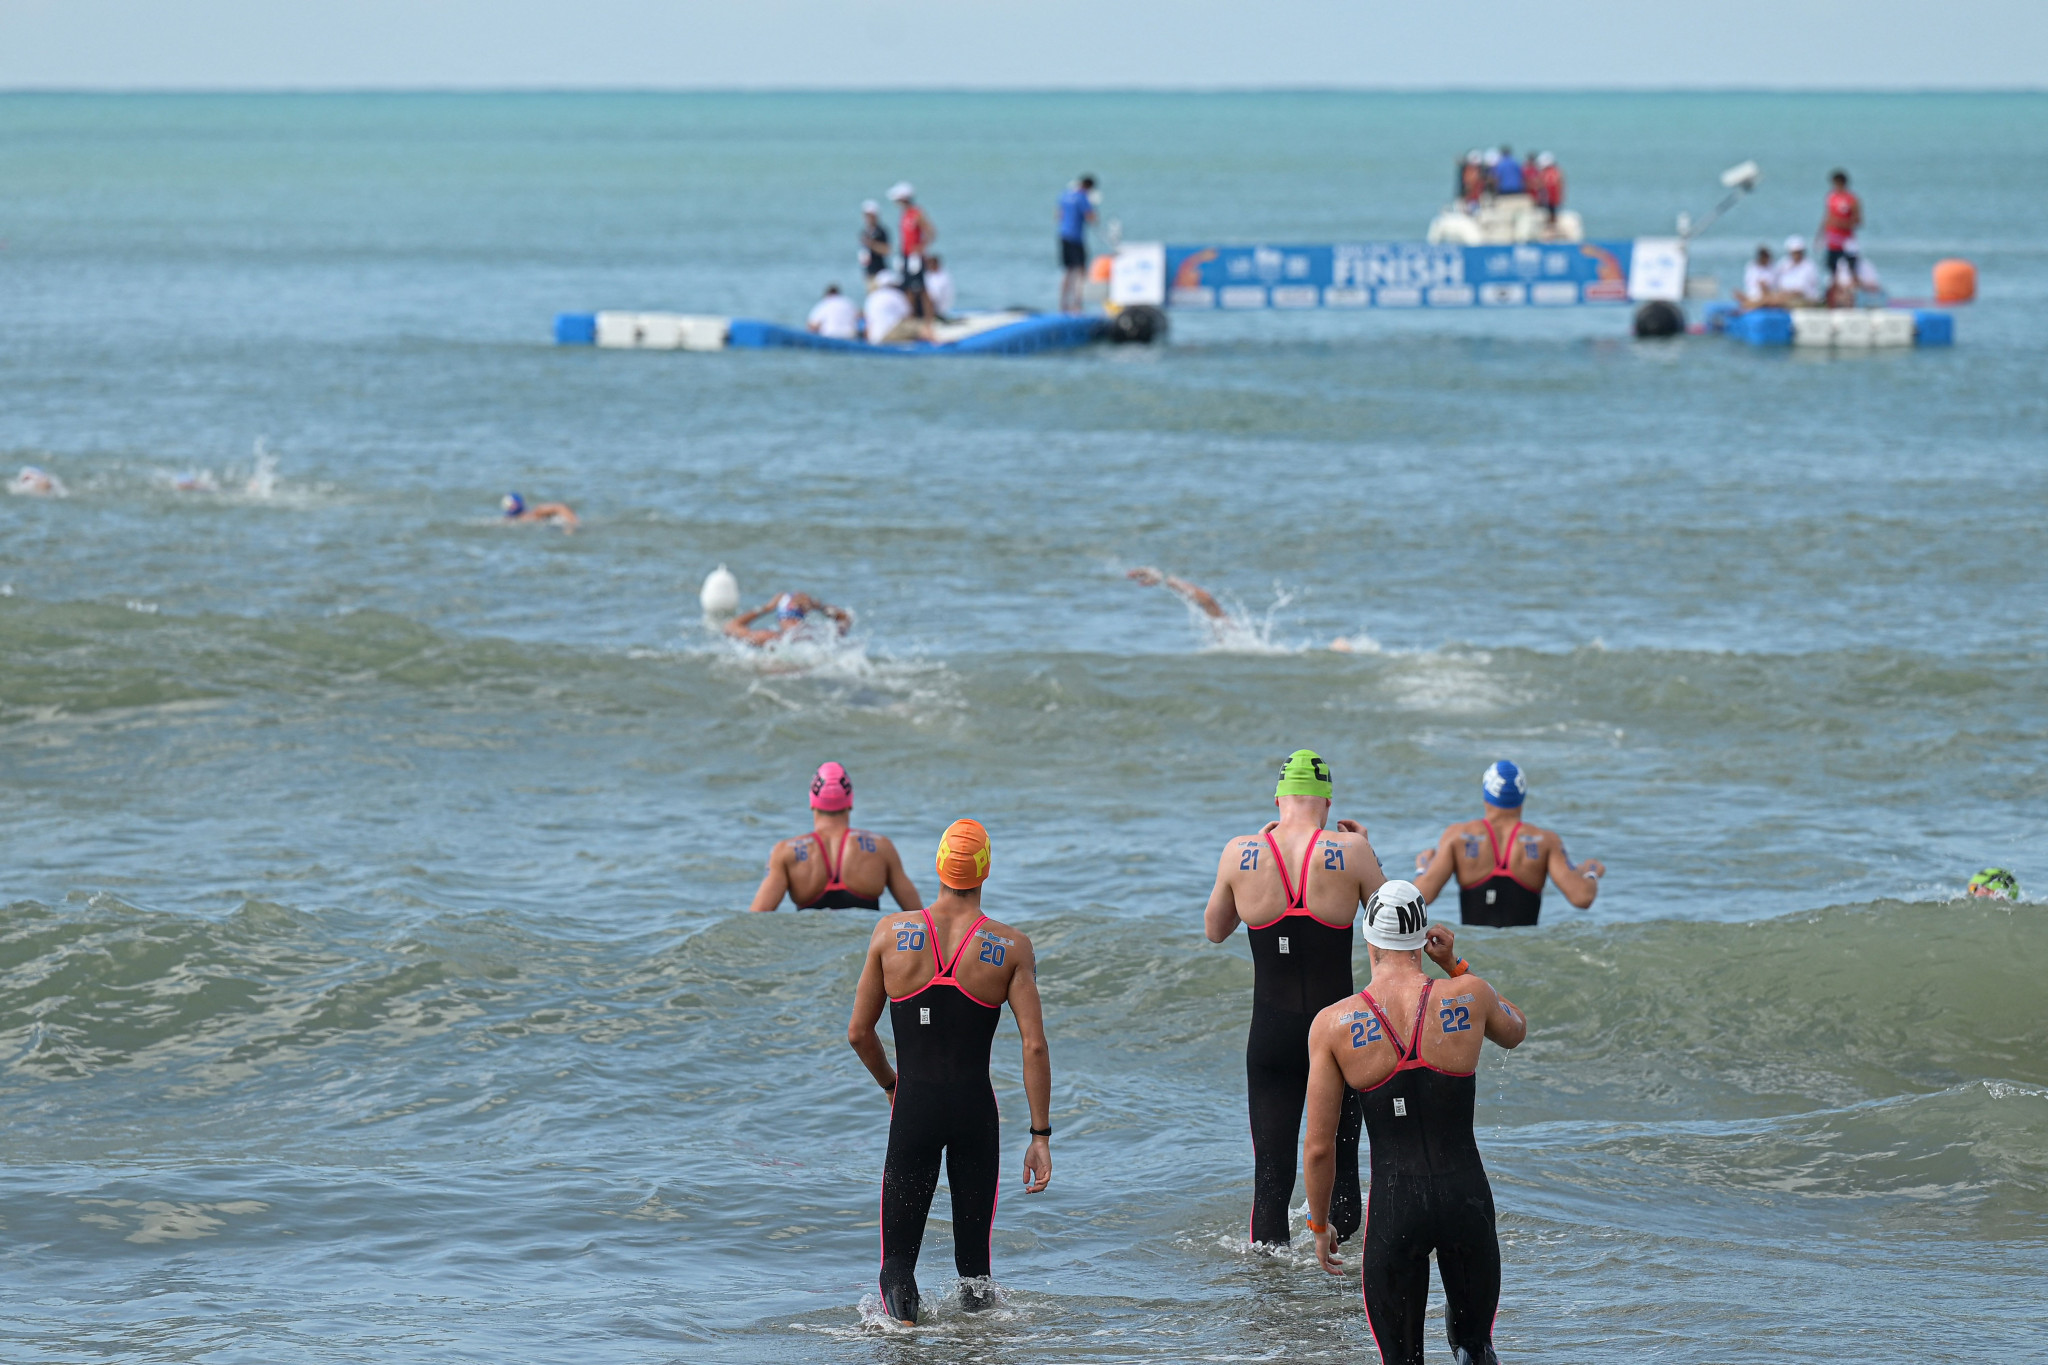 Italy and the Netherlands had earlier claimed golds in the men's and women's five kilometres open water events ©Getty Images